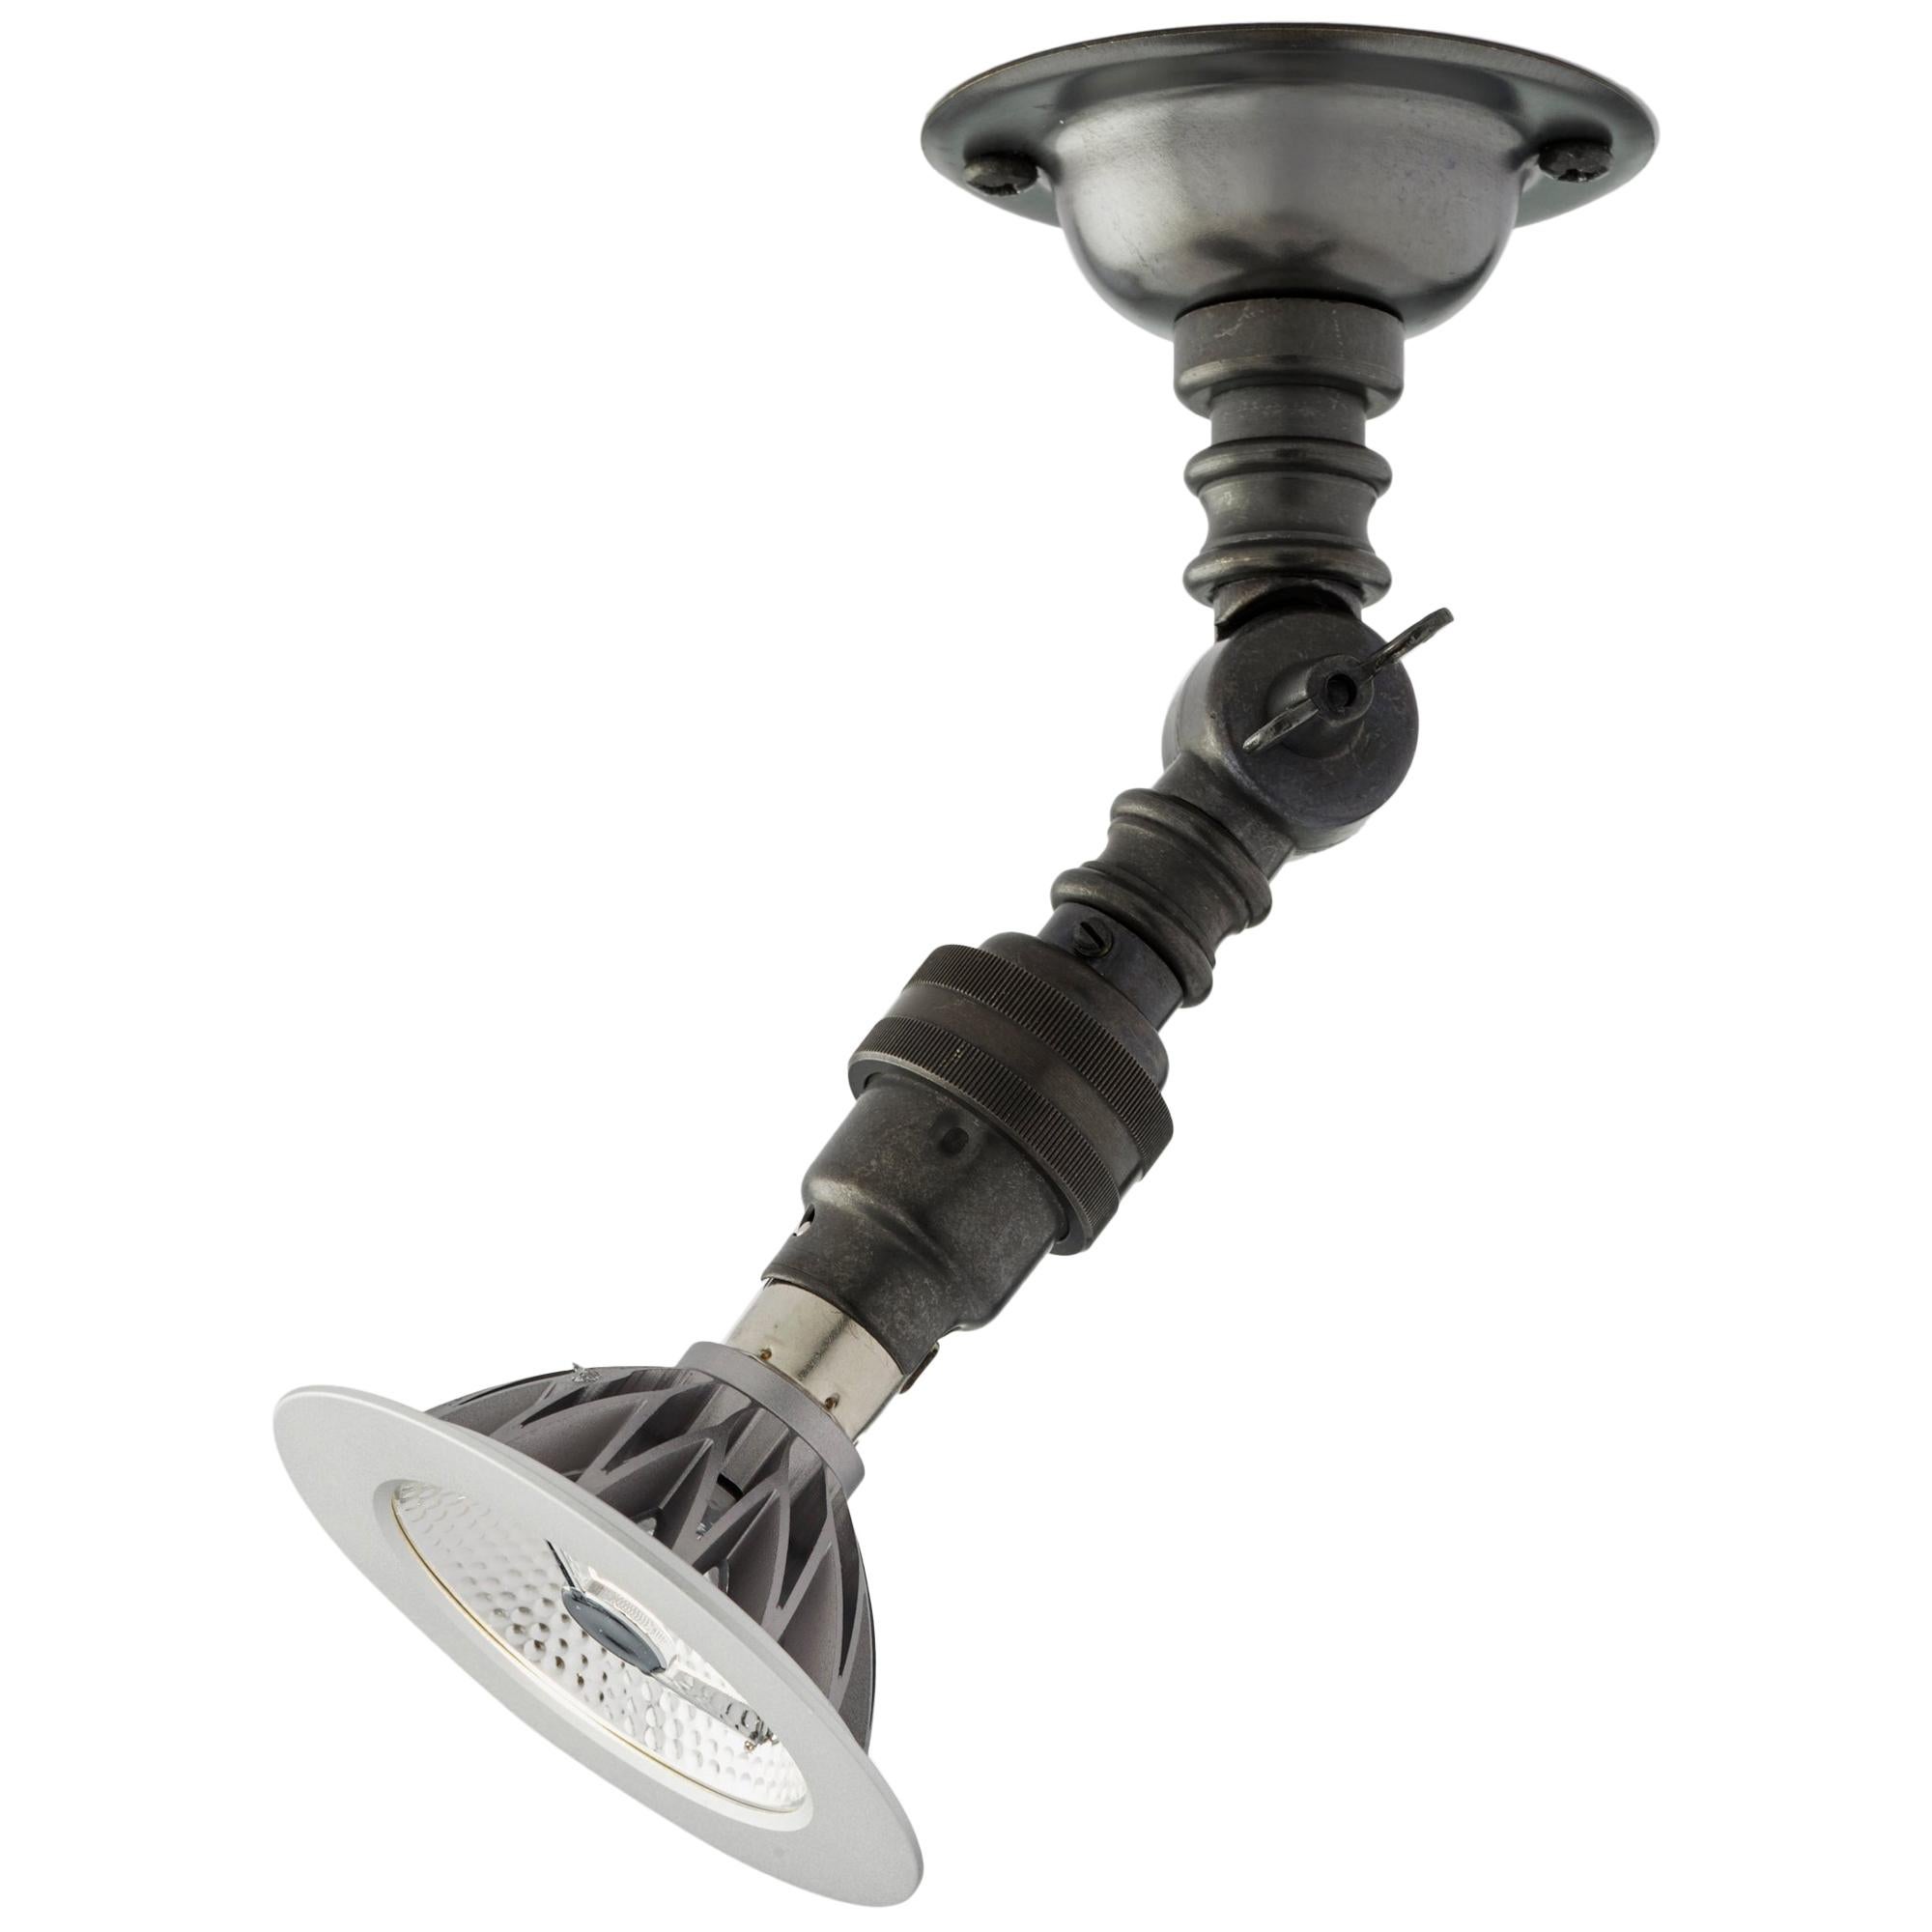 Tekna Lilley Spot LED Light with Dark Bronze Finish and Lamp/Driver